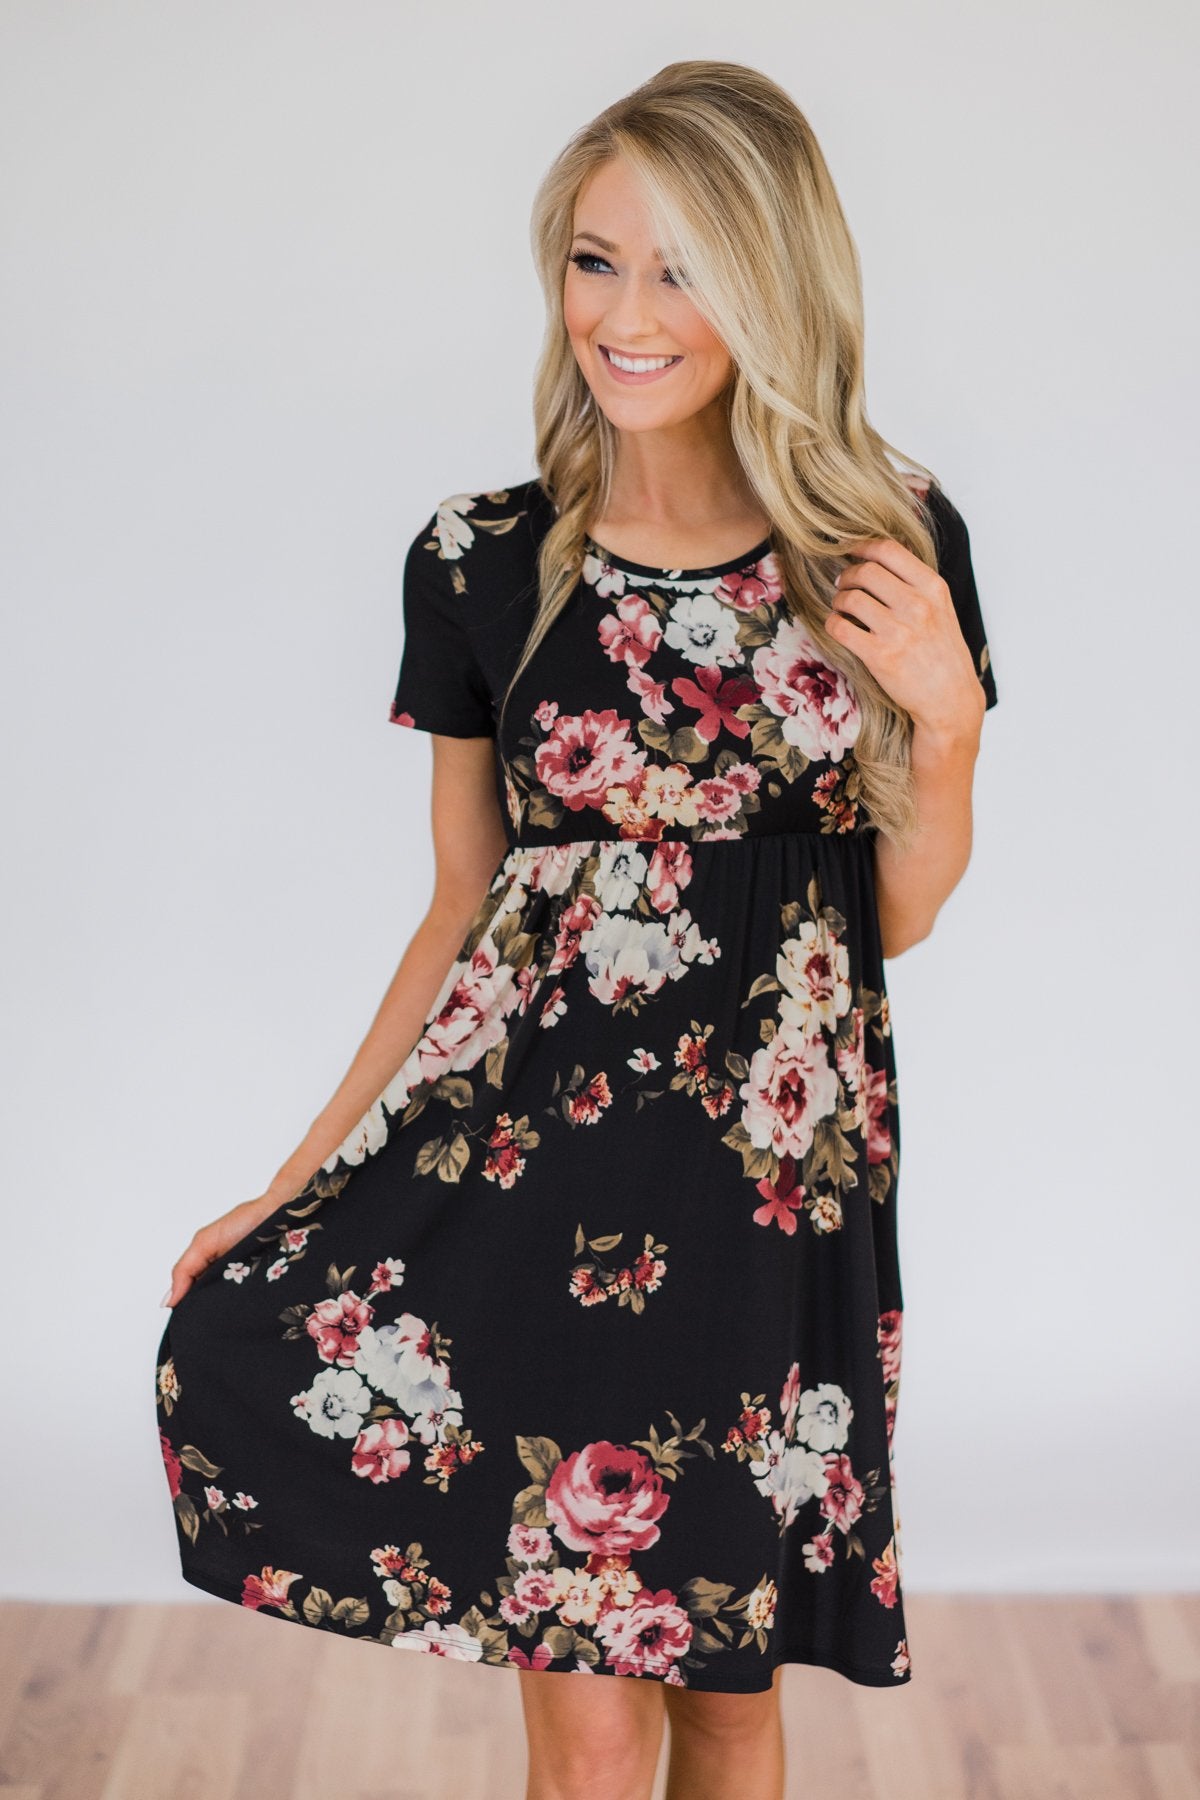 Best Is Yet To Come Floral Short Sleeve Dress- Black